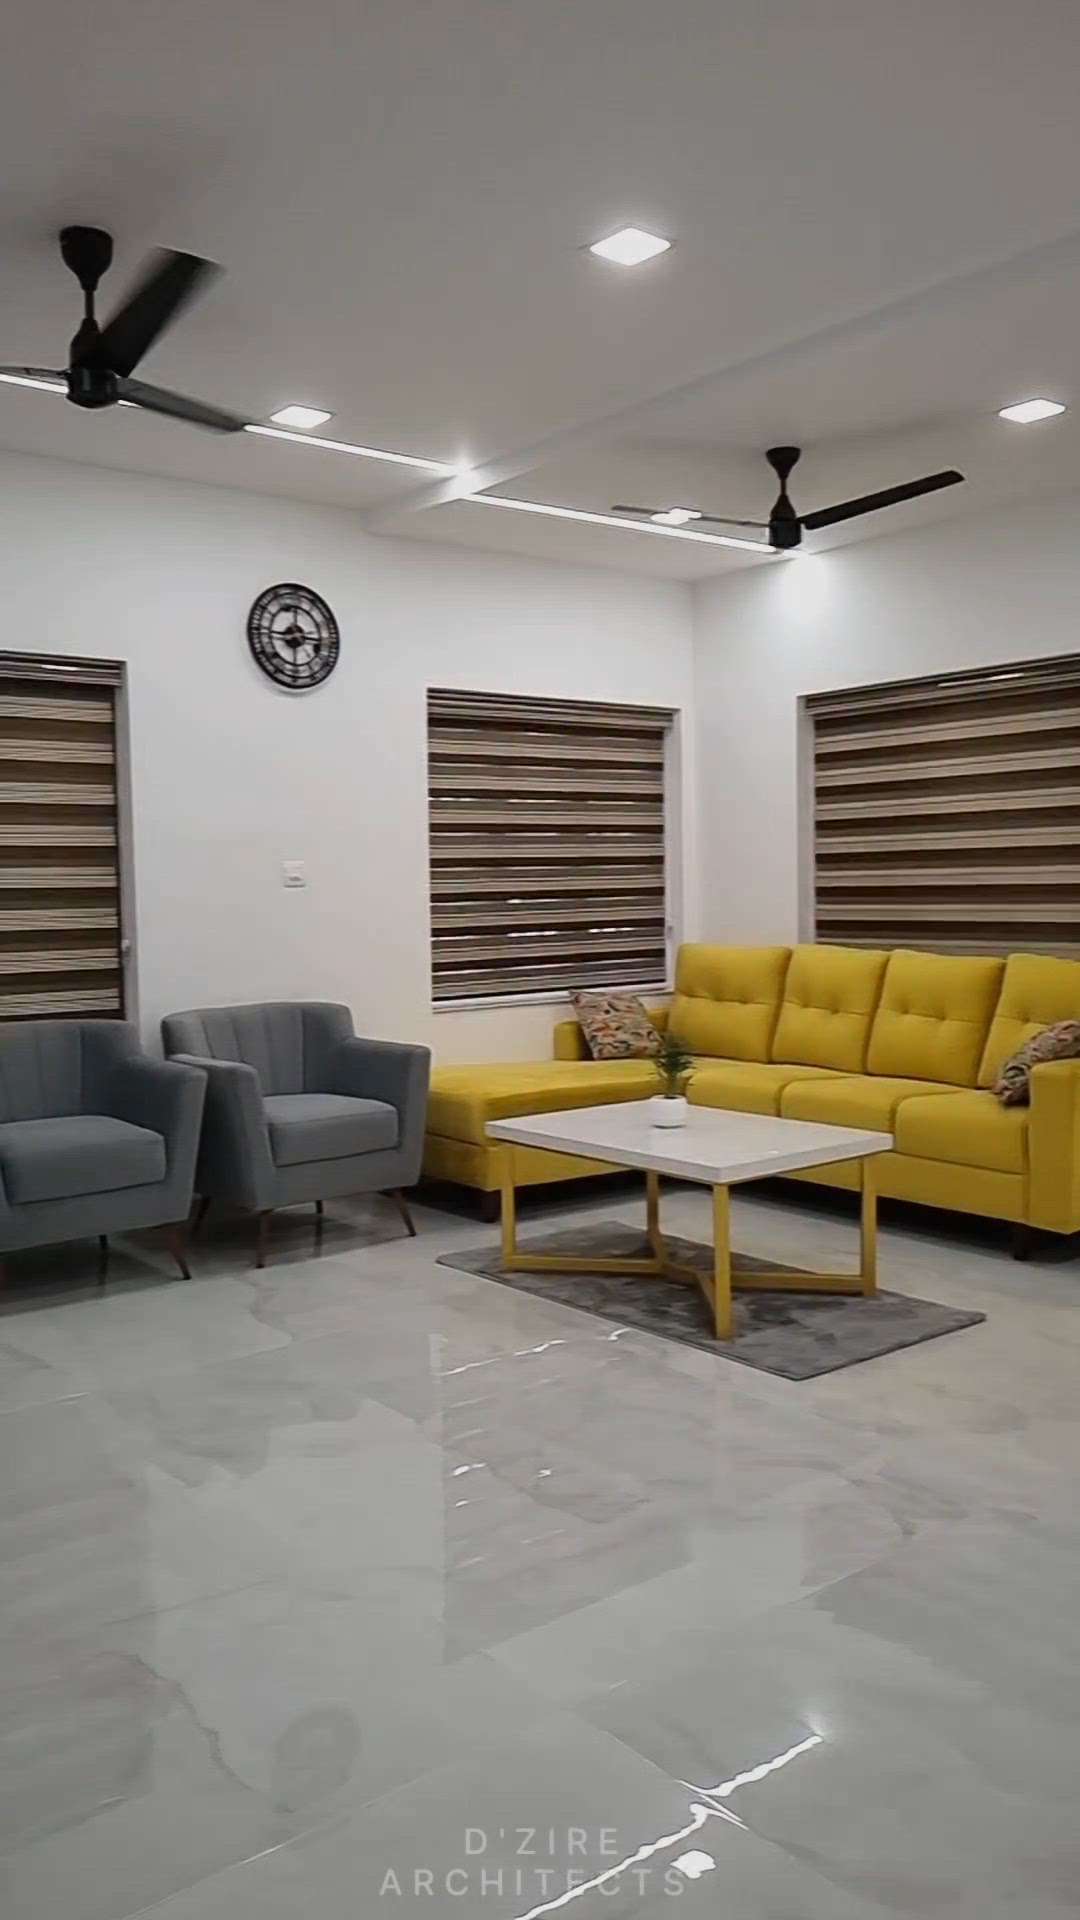 Completed interior project at CUSAT,Kalamassery.
.
Client : Mr Sudheer
Sqft : 1700
Designed by : @dzirearchitects 
 #KeralaStyleHouse #keralastyle #keralaplanners #MrHomeKerala #keralahome#renovation
#HouseDesigns #LivingroomDesigns #LivingRoomSofa #LivingroomTexturePainting #WALL_PANELLING #homerenovation #Carpenter #tvunits #Prayerunit #InteriorDesigner #carporch  #HouseRenovation#dinning